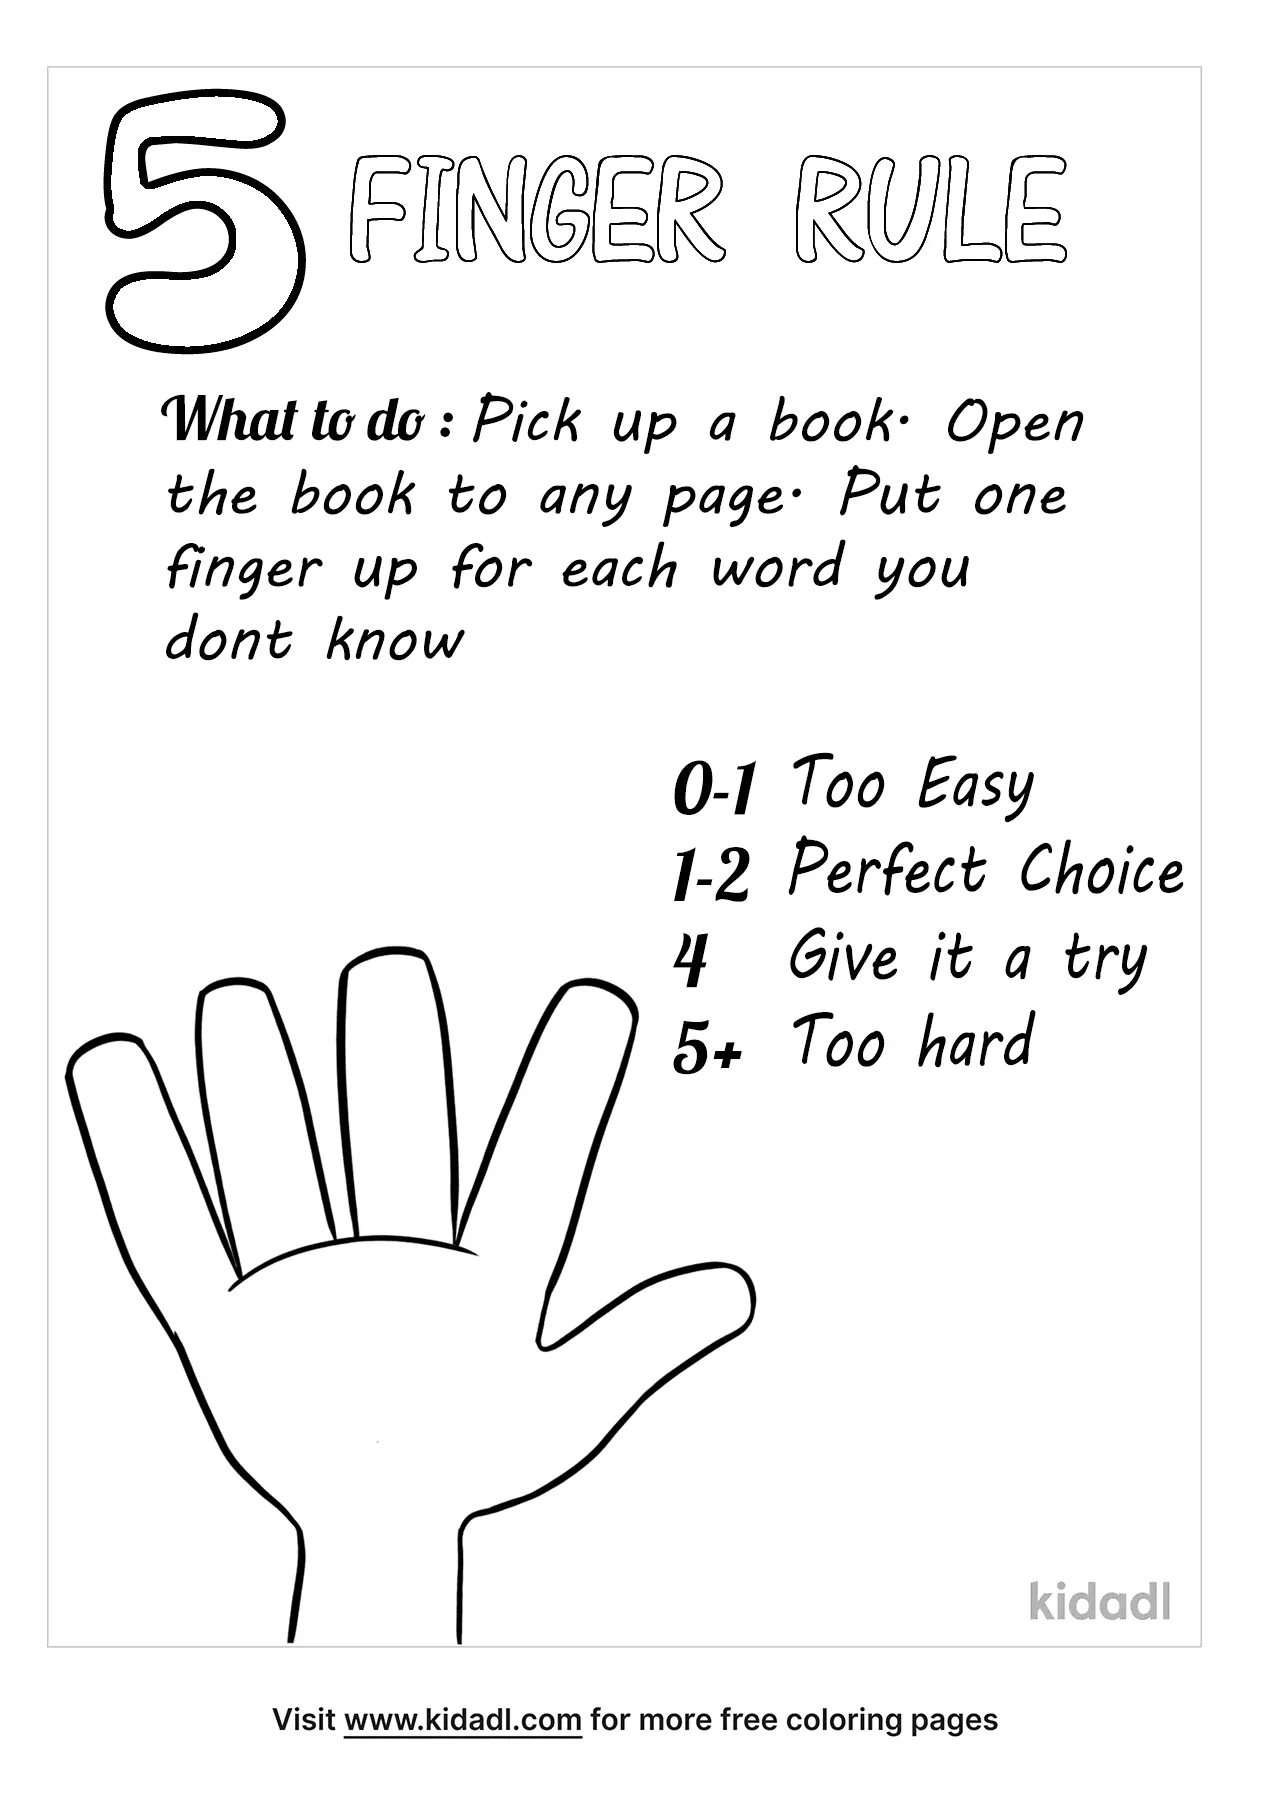 5 Finger Rule Coloring Page